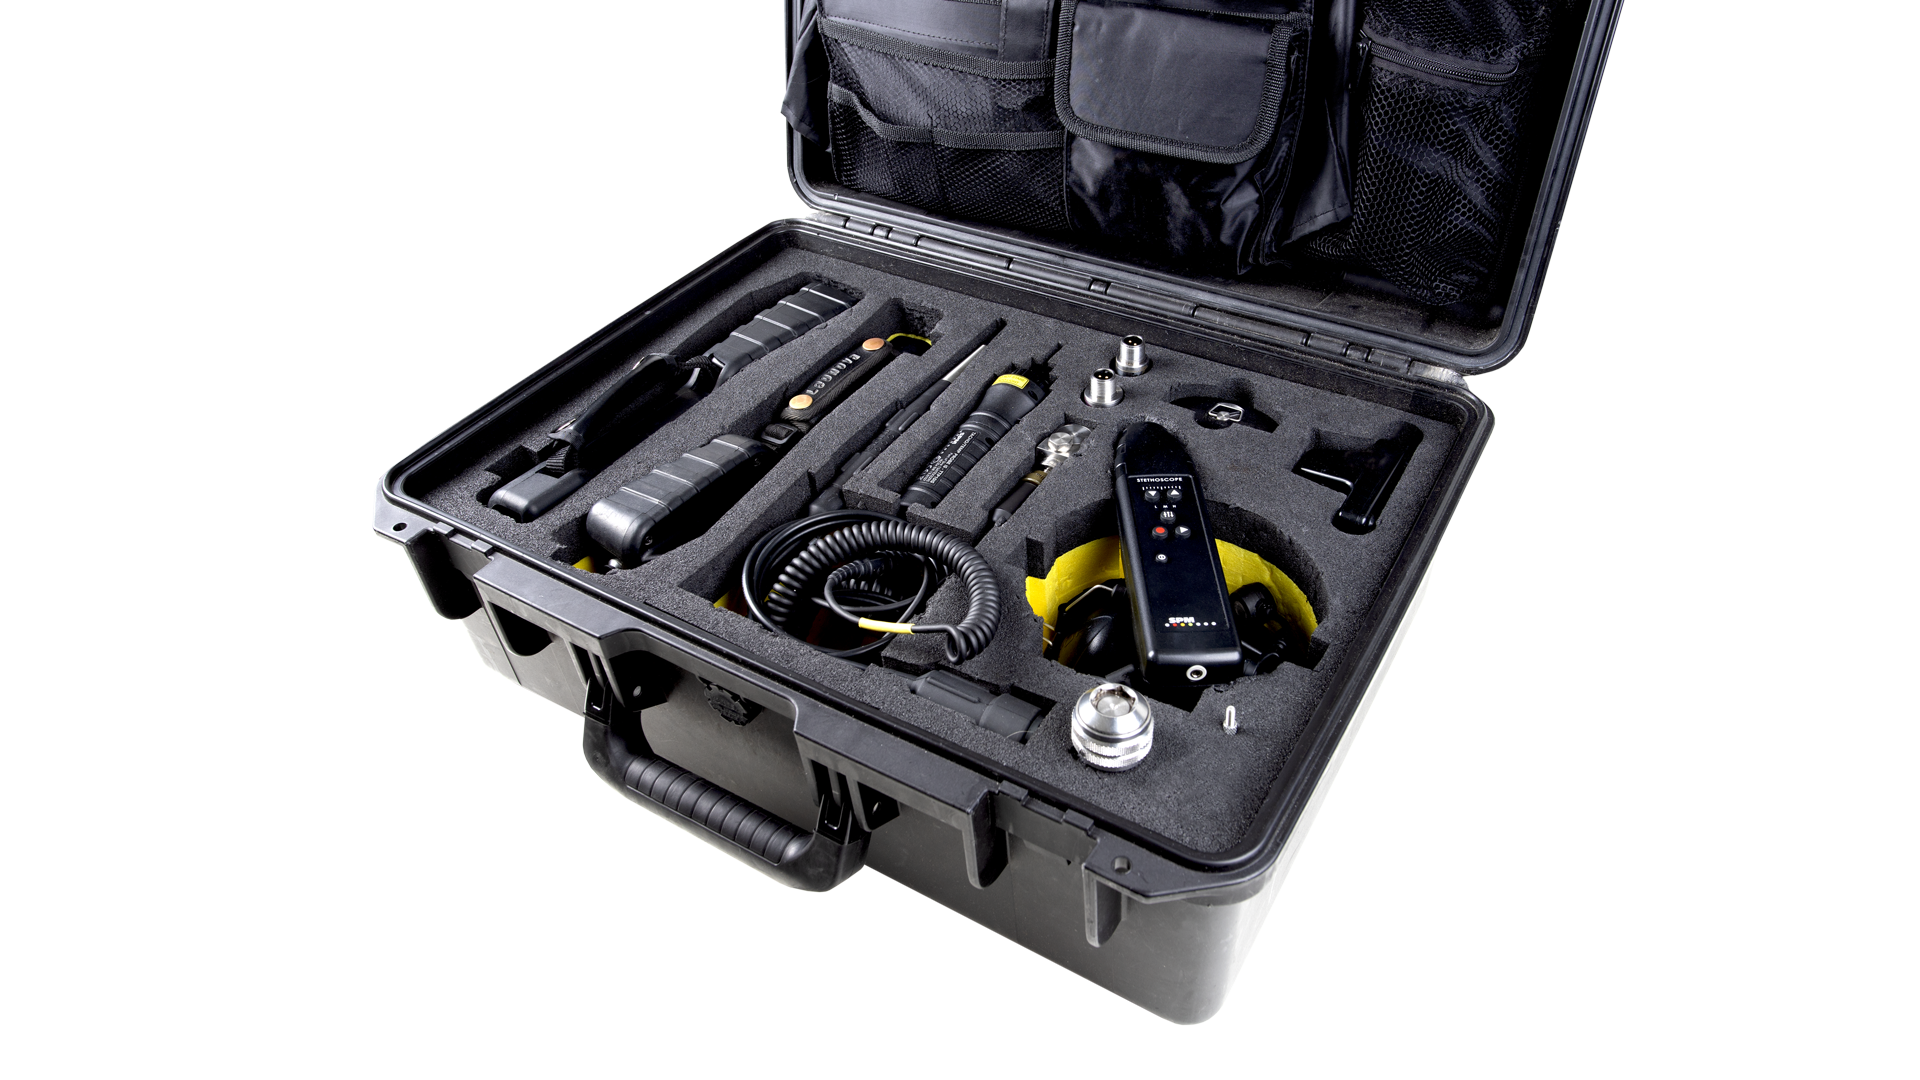 Carrying case CAS25, including portable instruments and accessories